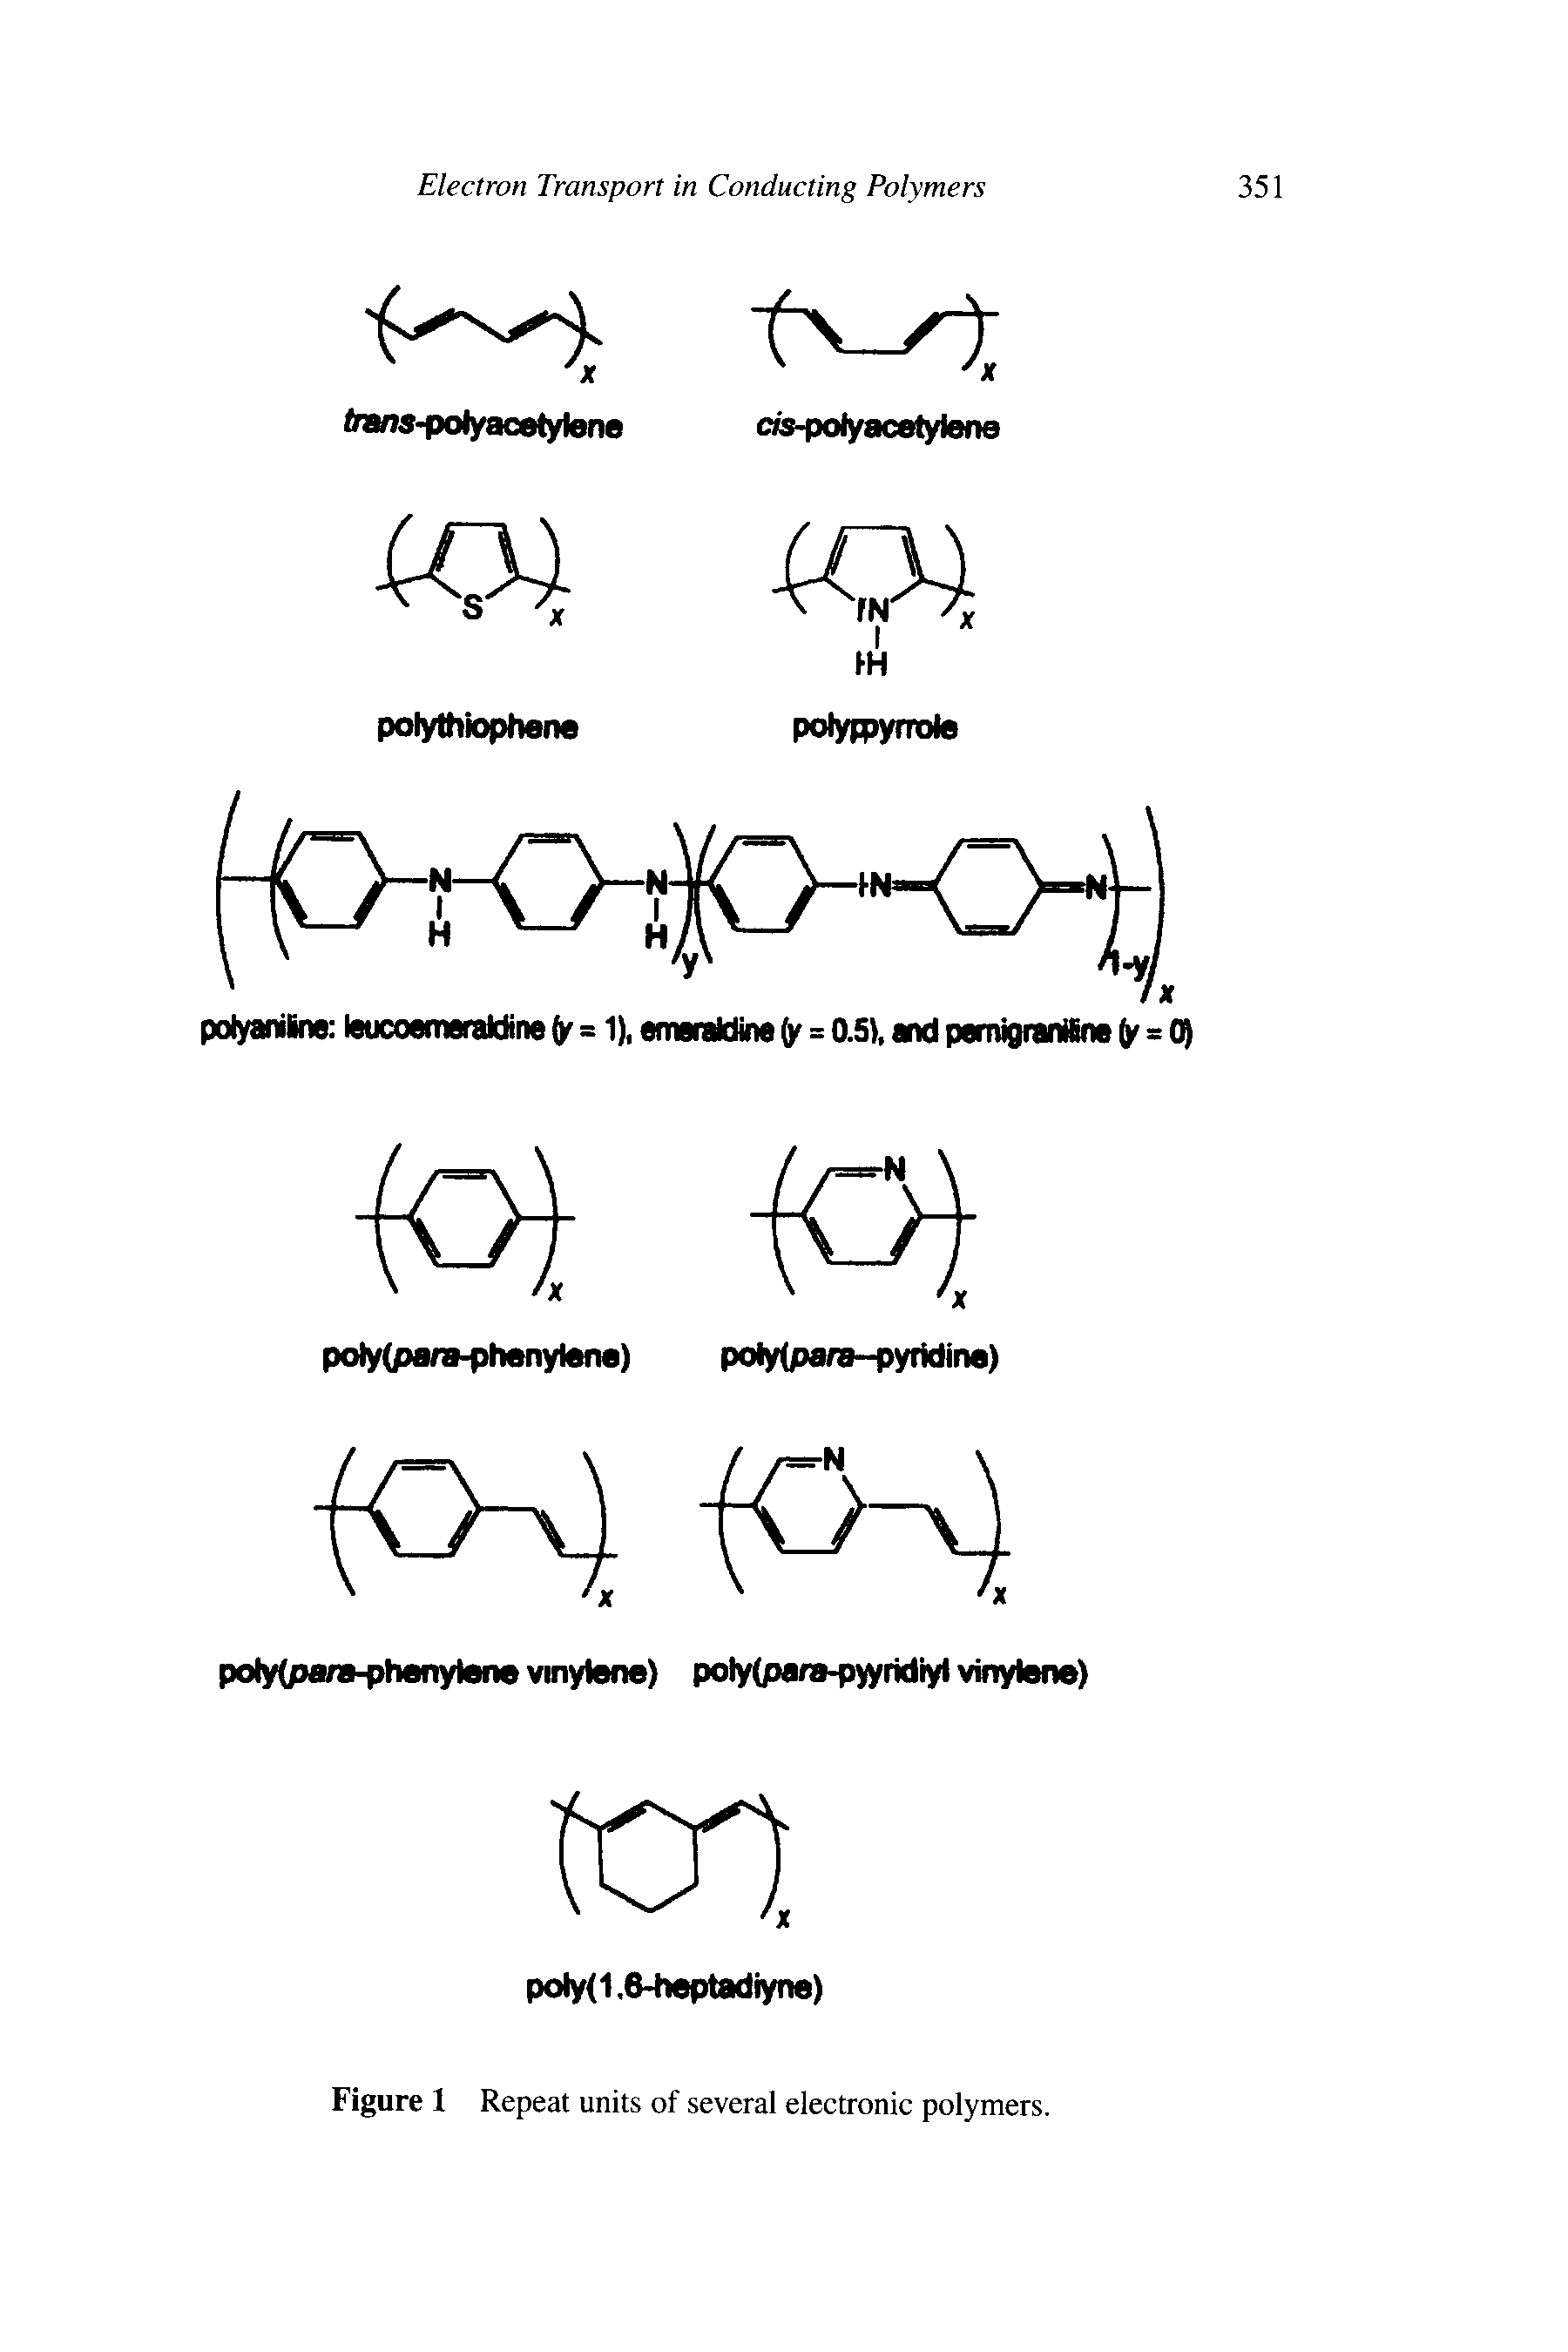 Figure 1 Repeat units of several electronic polymers.